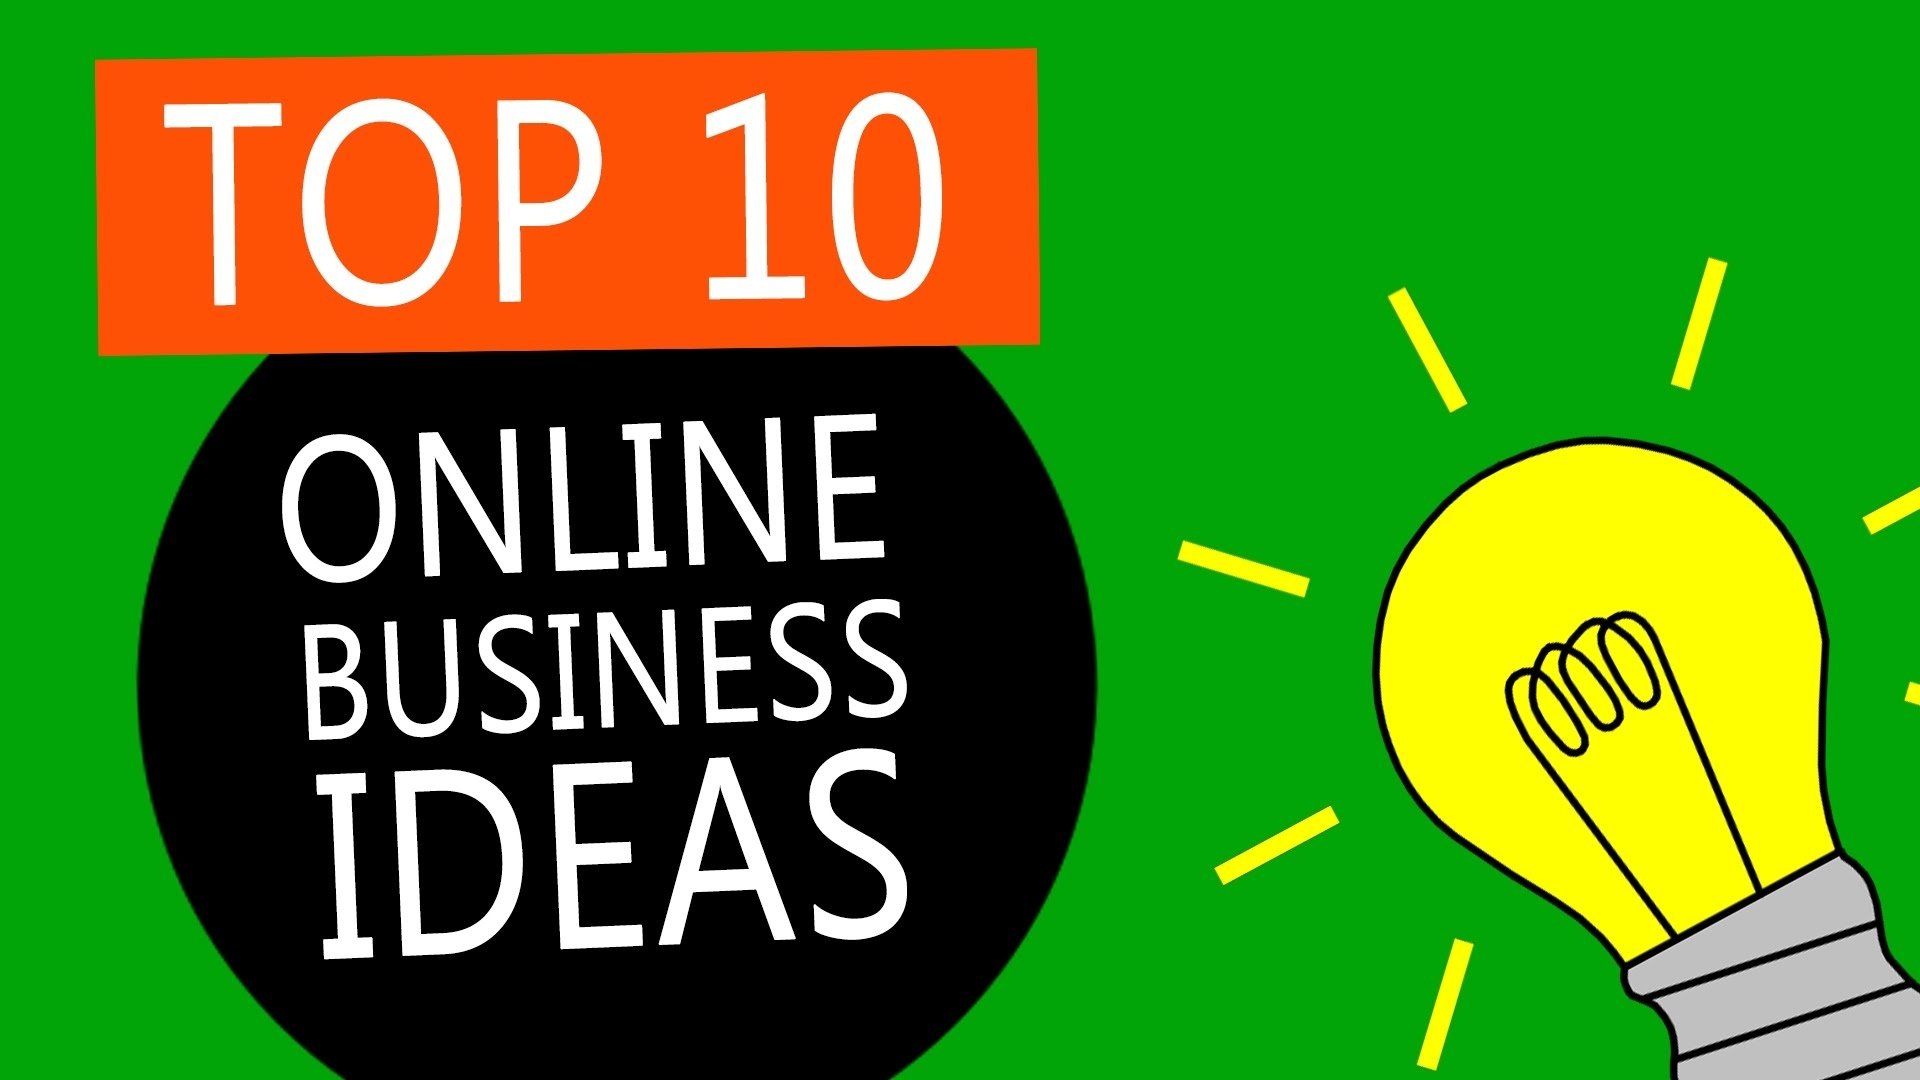 10 Awesome Ideas To Start A Business top 10 best online business ideas to start a small business youtube 4 2022